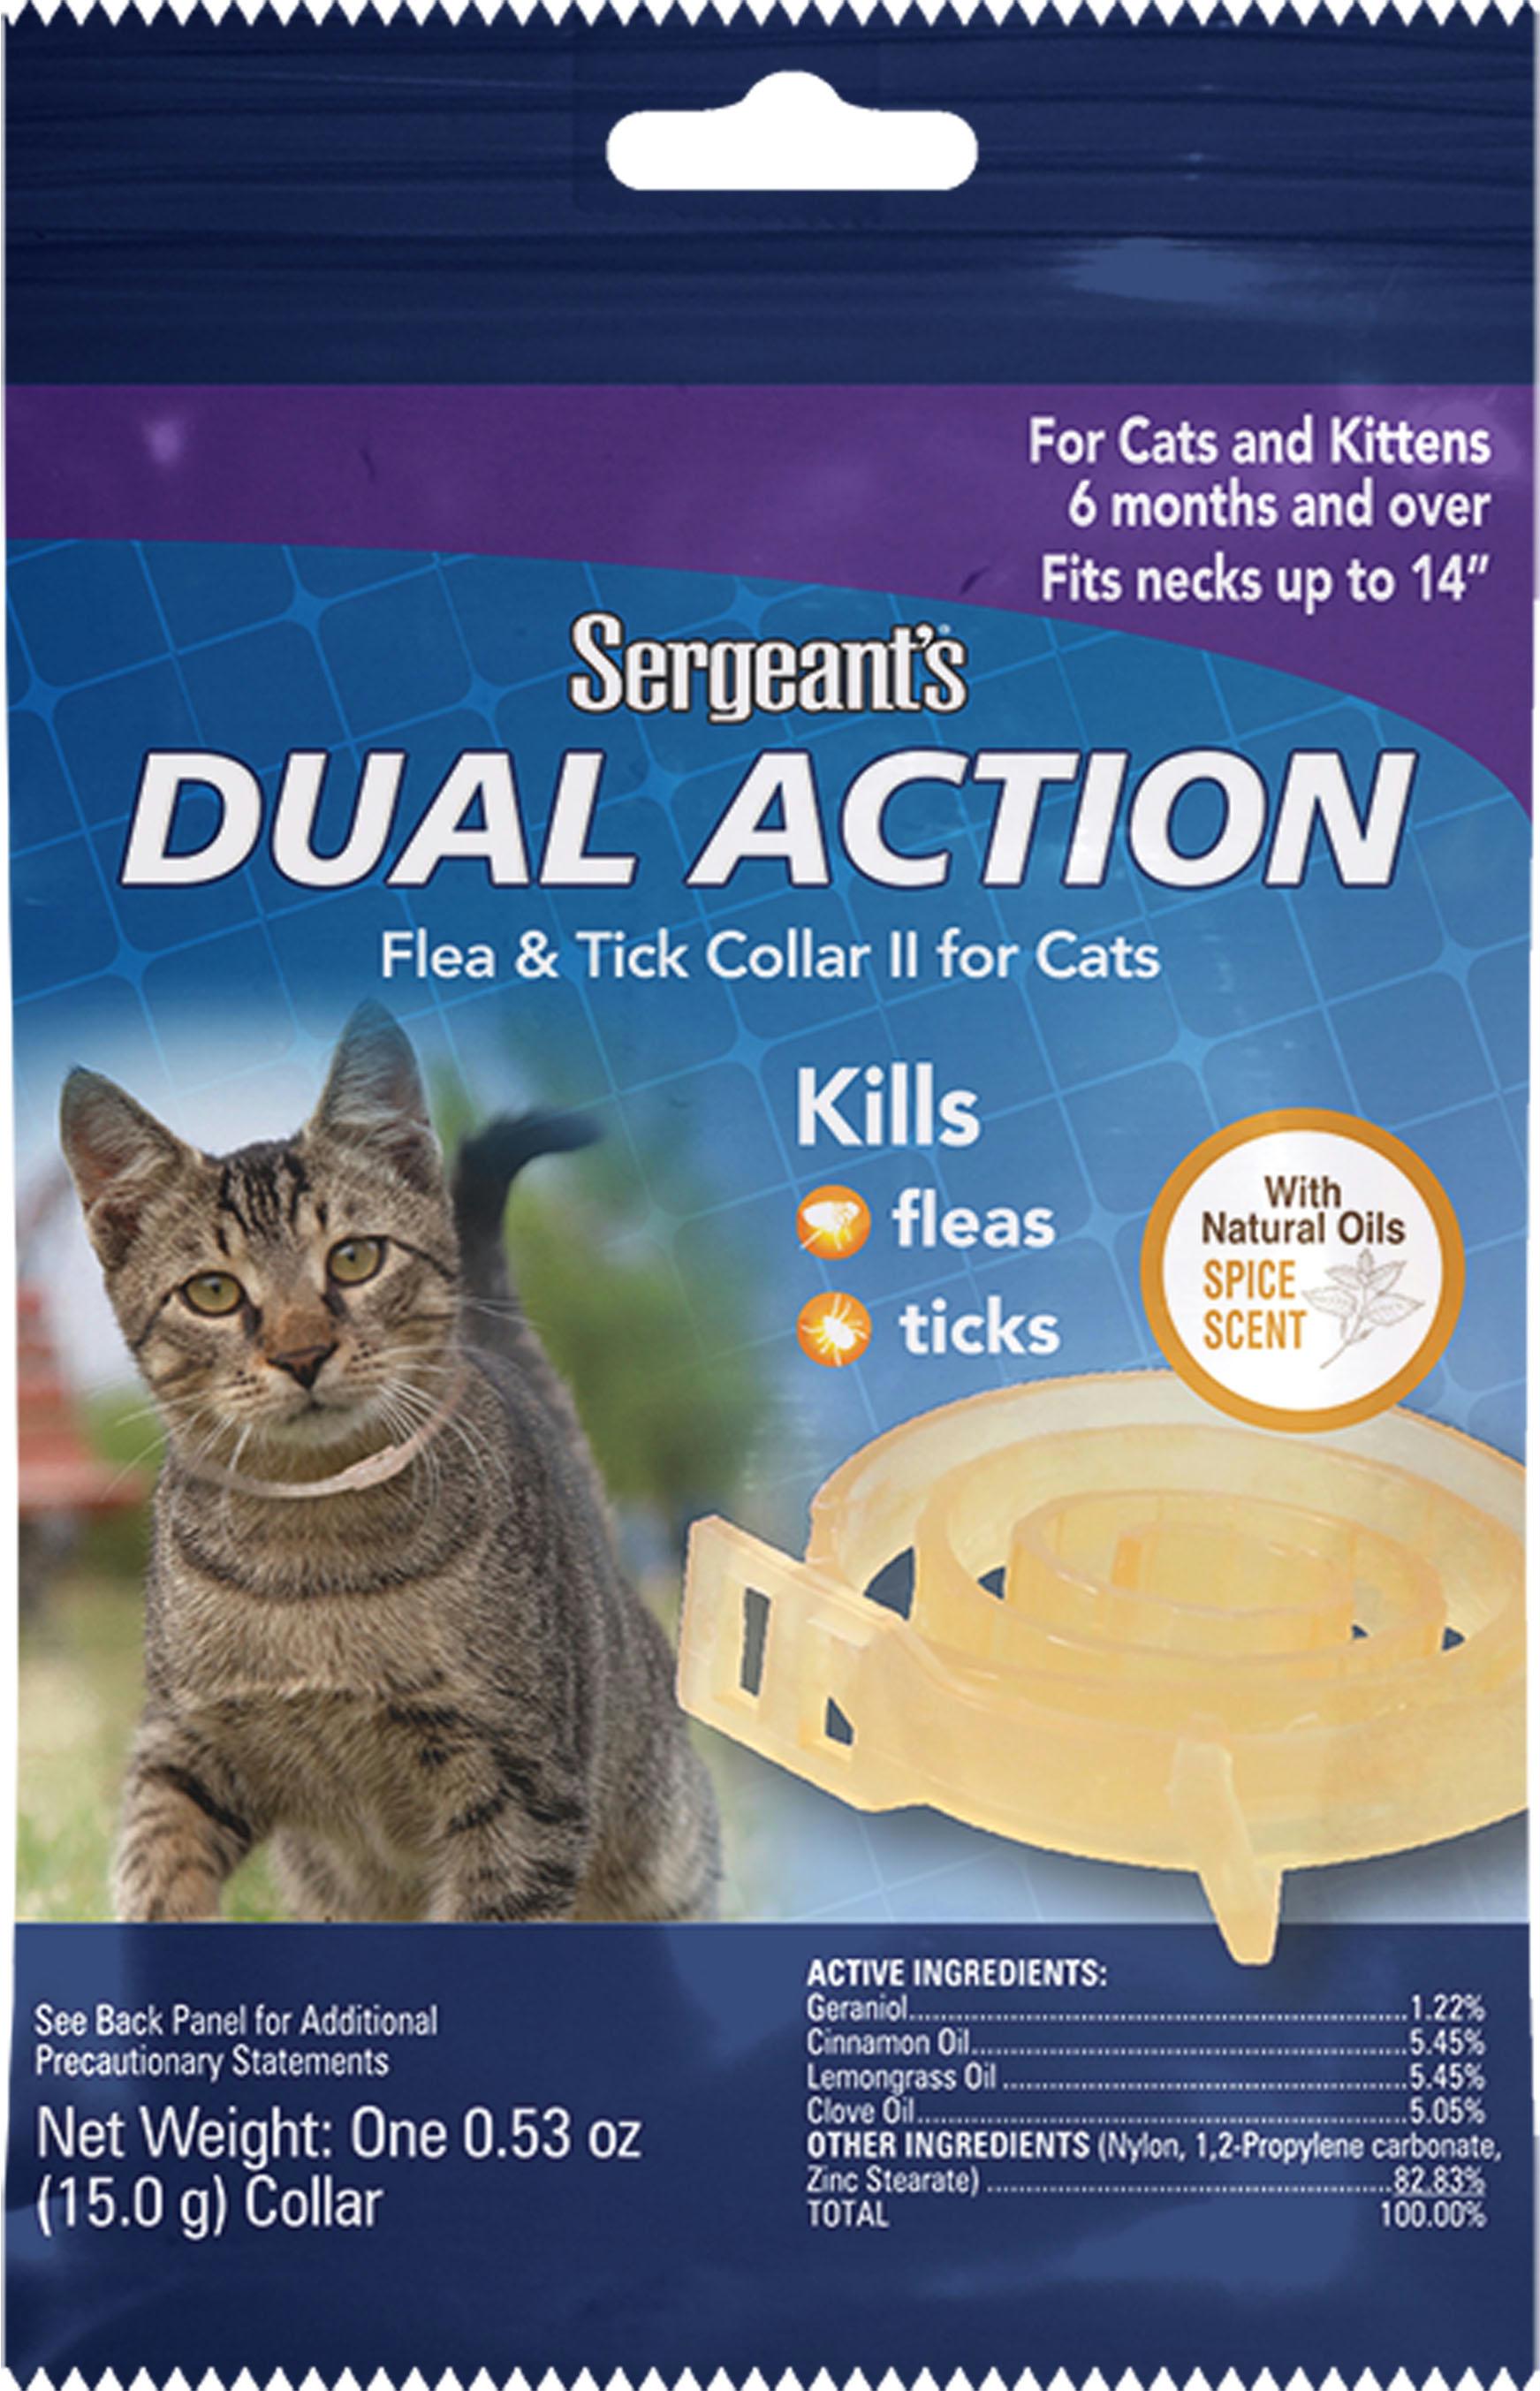 Sergeants Dual Action Flea & Tick Collar For Cats - aomega-products